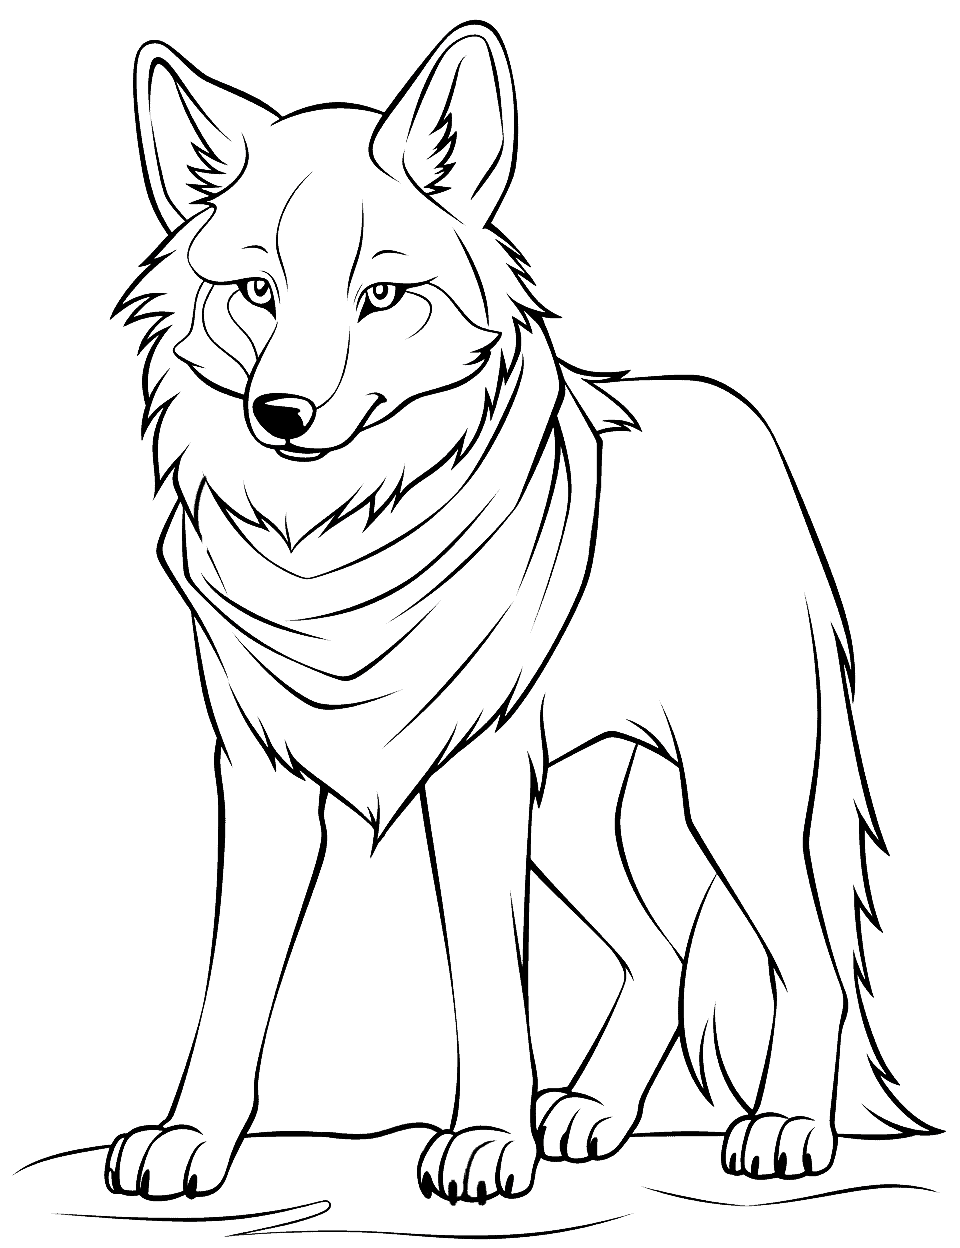 Anime Wolf Hero Coloring Page - An anime-style wolf with a determined look, possibly with a scarf.